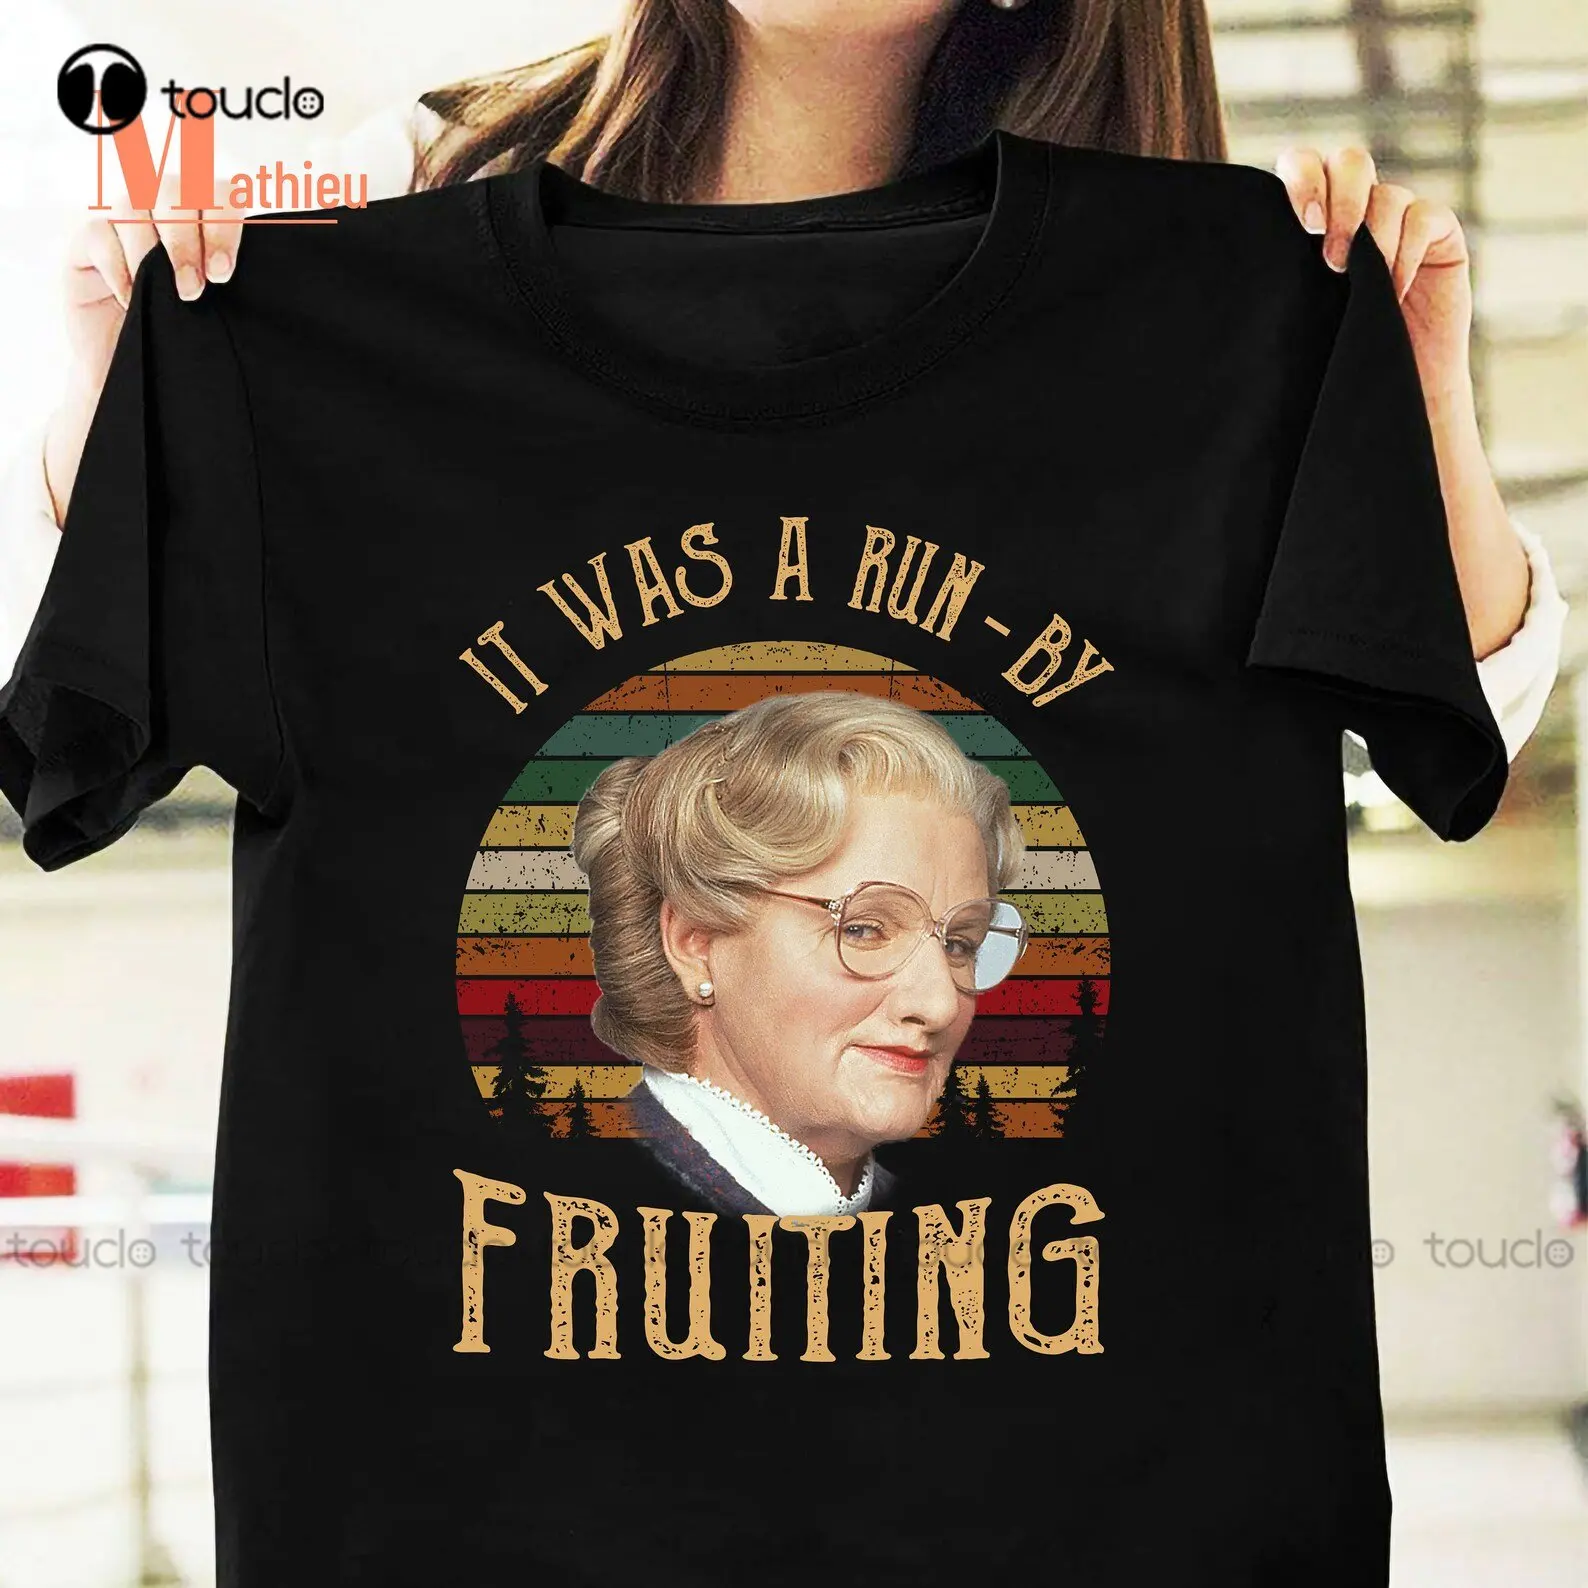 

Mrs Doubtfire It Was A Run By Fruiting Vintage T-Shirt Mrs Doubtfire Shirt Shirt For Women Xs-5Xl Christmas Gift Printed Tee